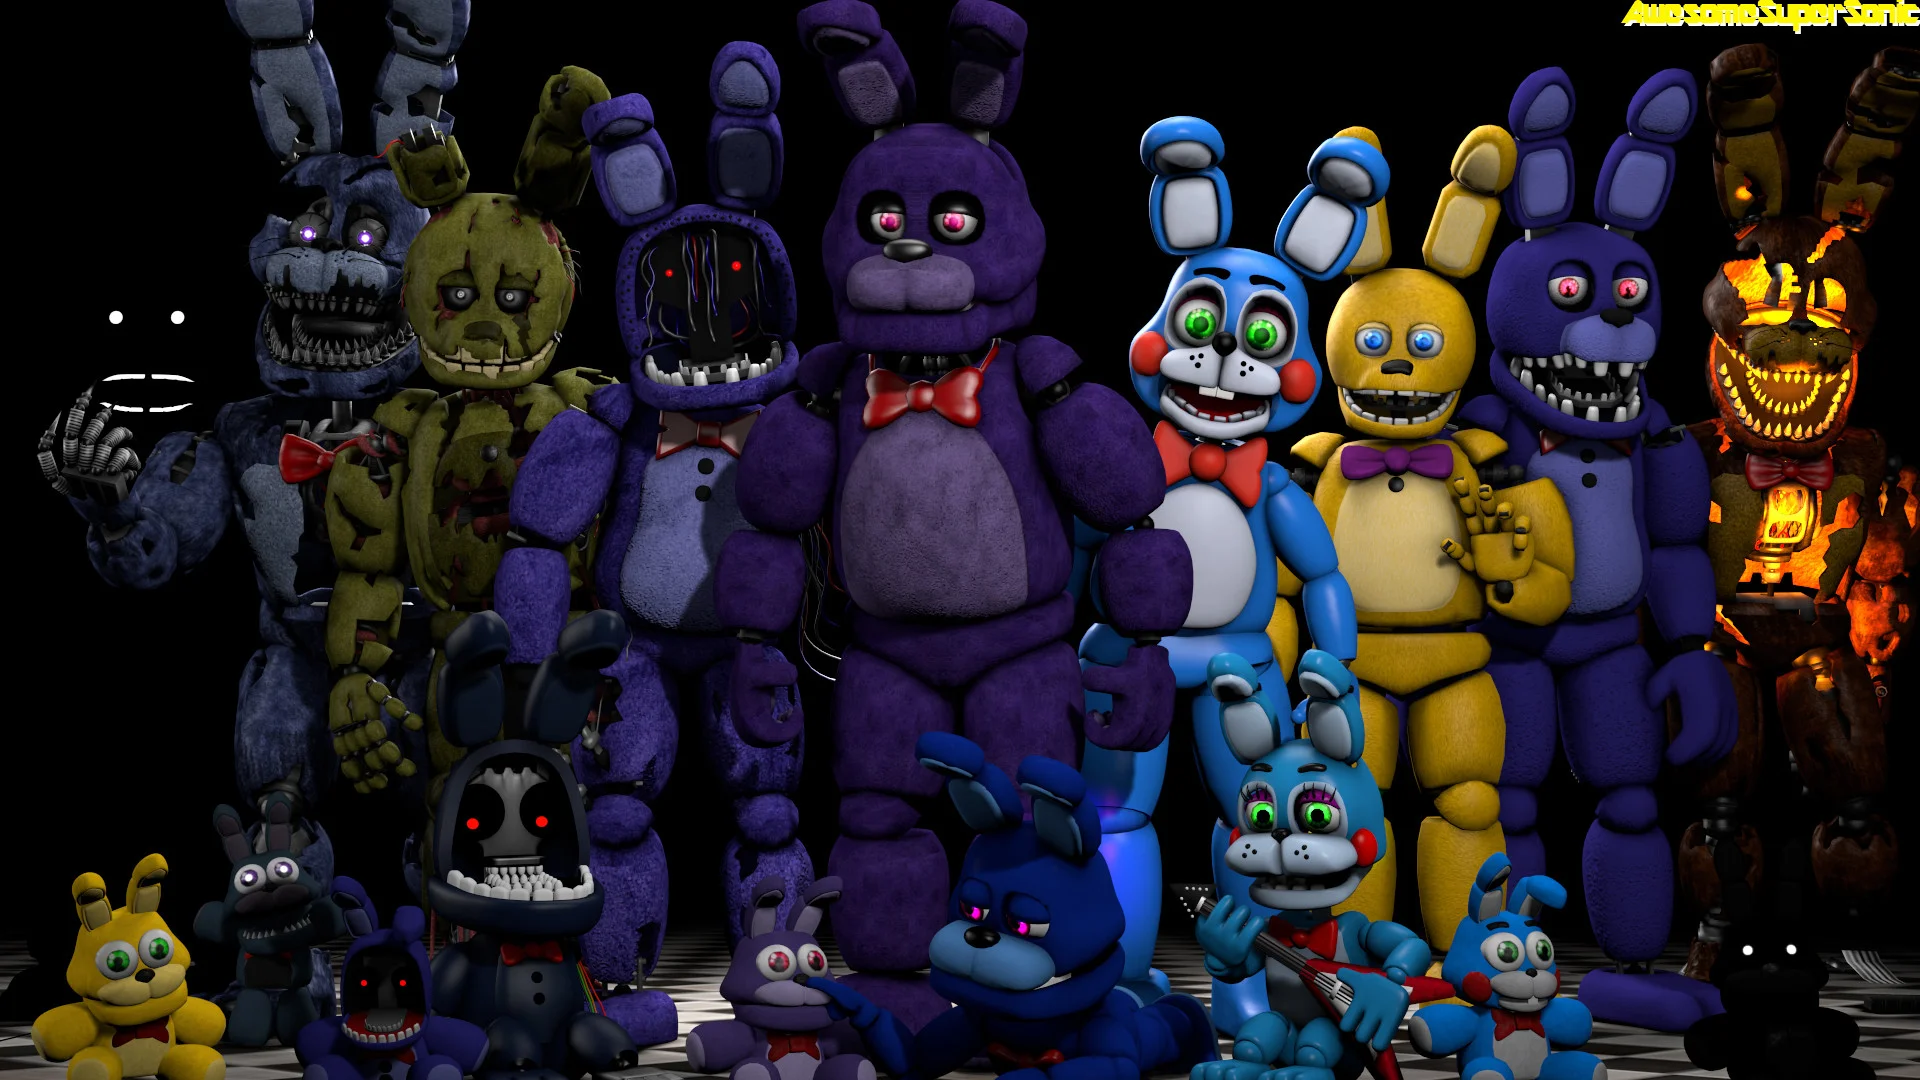 FNaF Bunnies by AwesomeSuperSonic